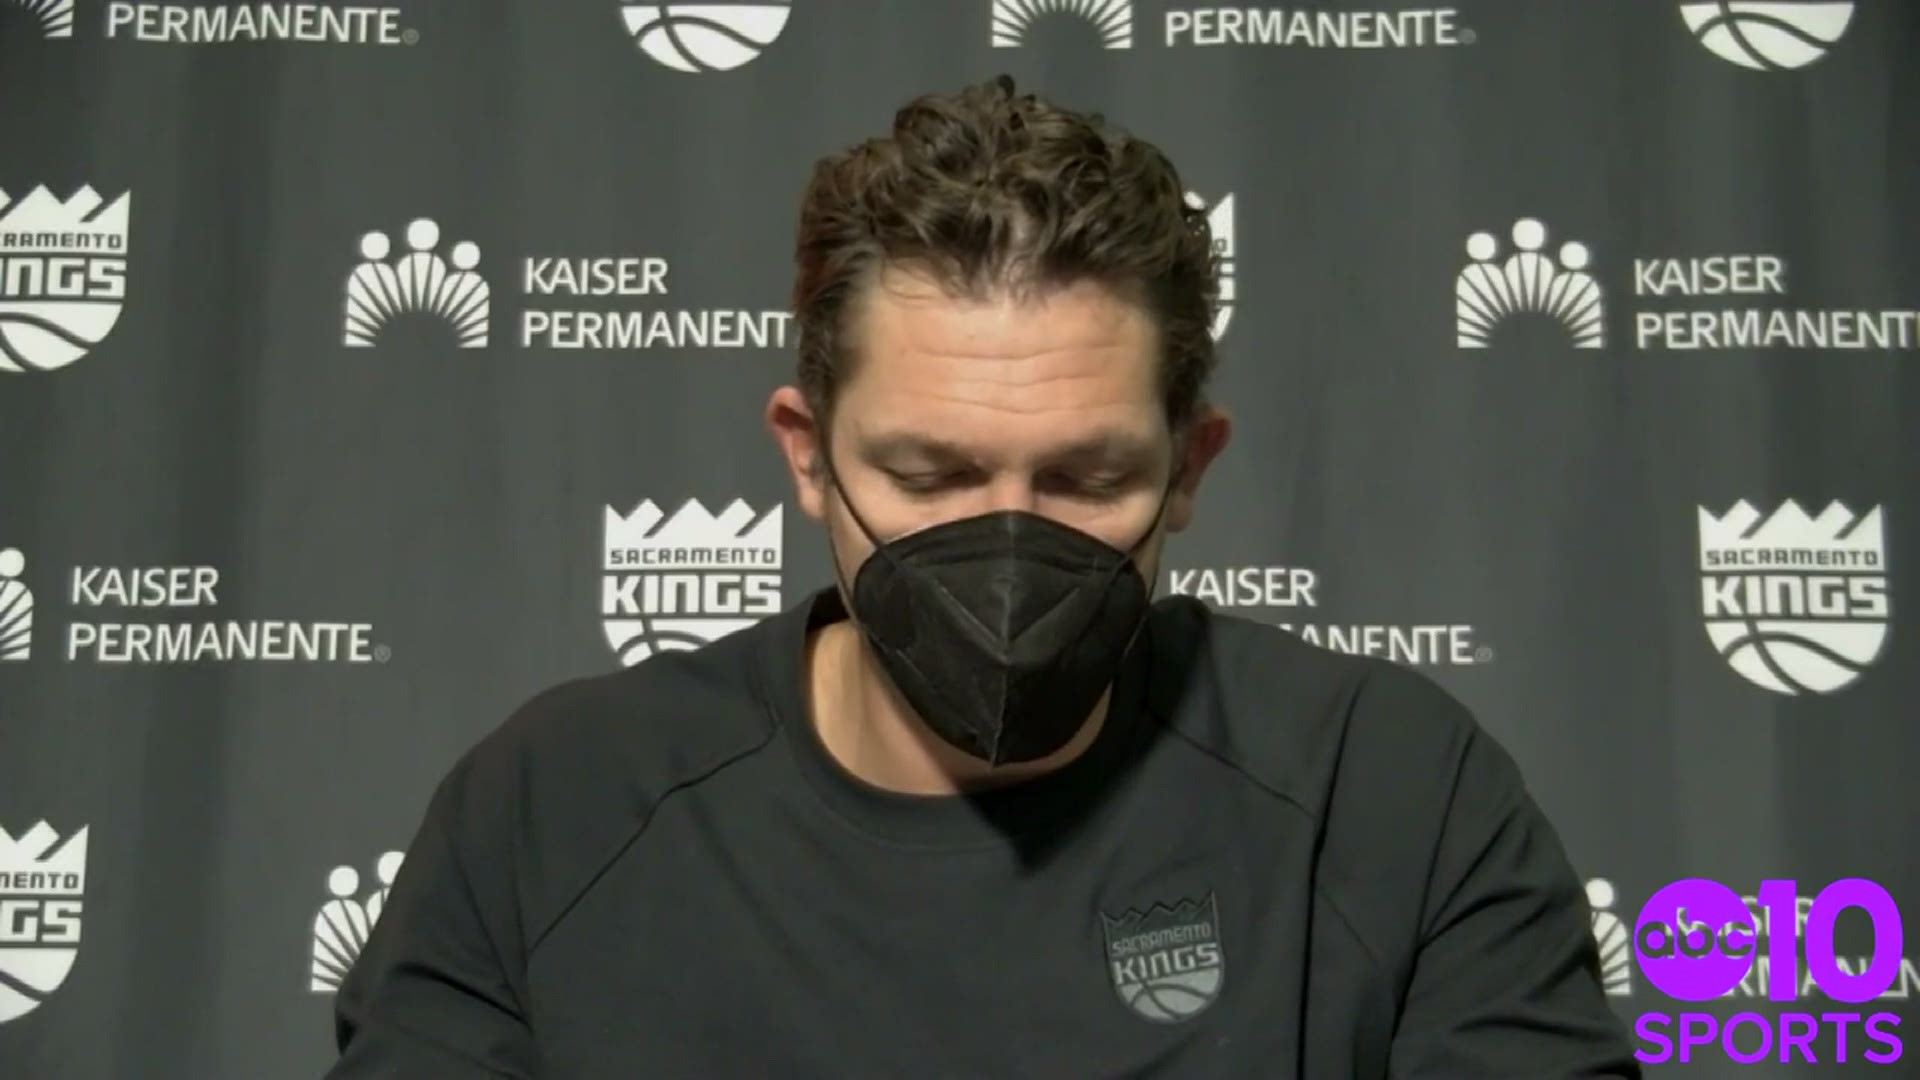 Kings coach Luke Walton talks about Sacramento’s 123-112 loss to the Orlando Magic on Friday night and playing without De’Aaron Fox & Marvin Bagley due to injuries.